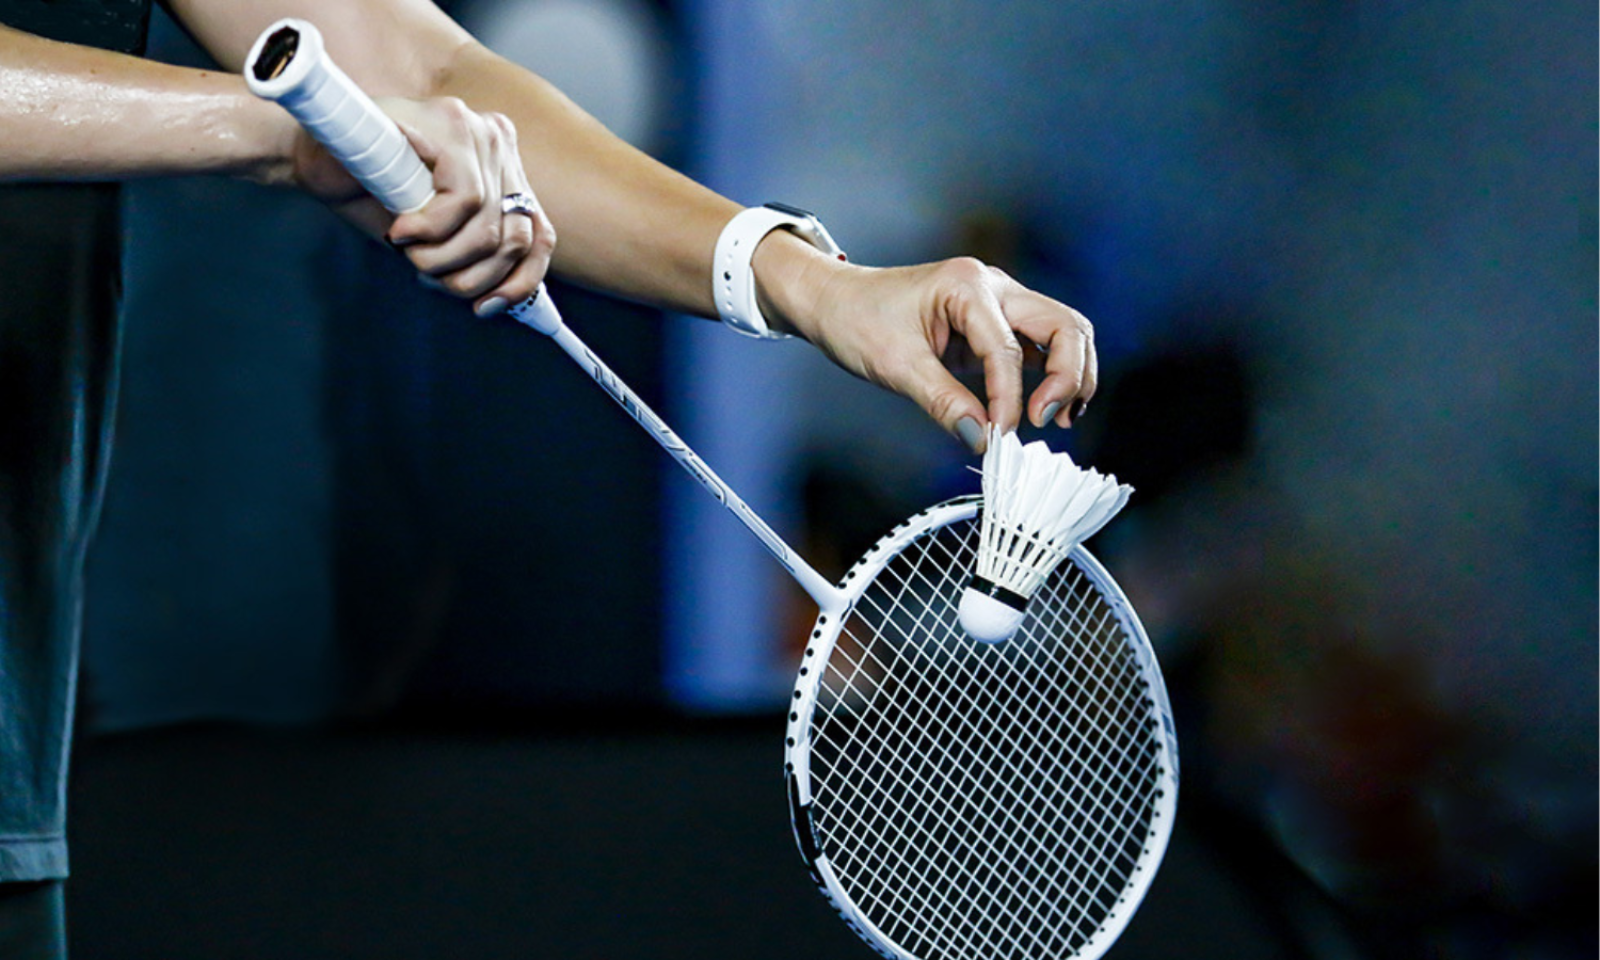 BWF approves temporary ban on unplayable 'spin serve